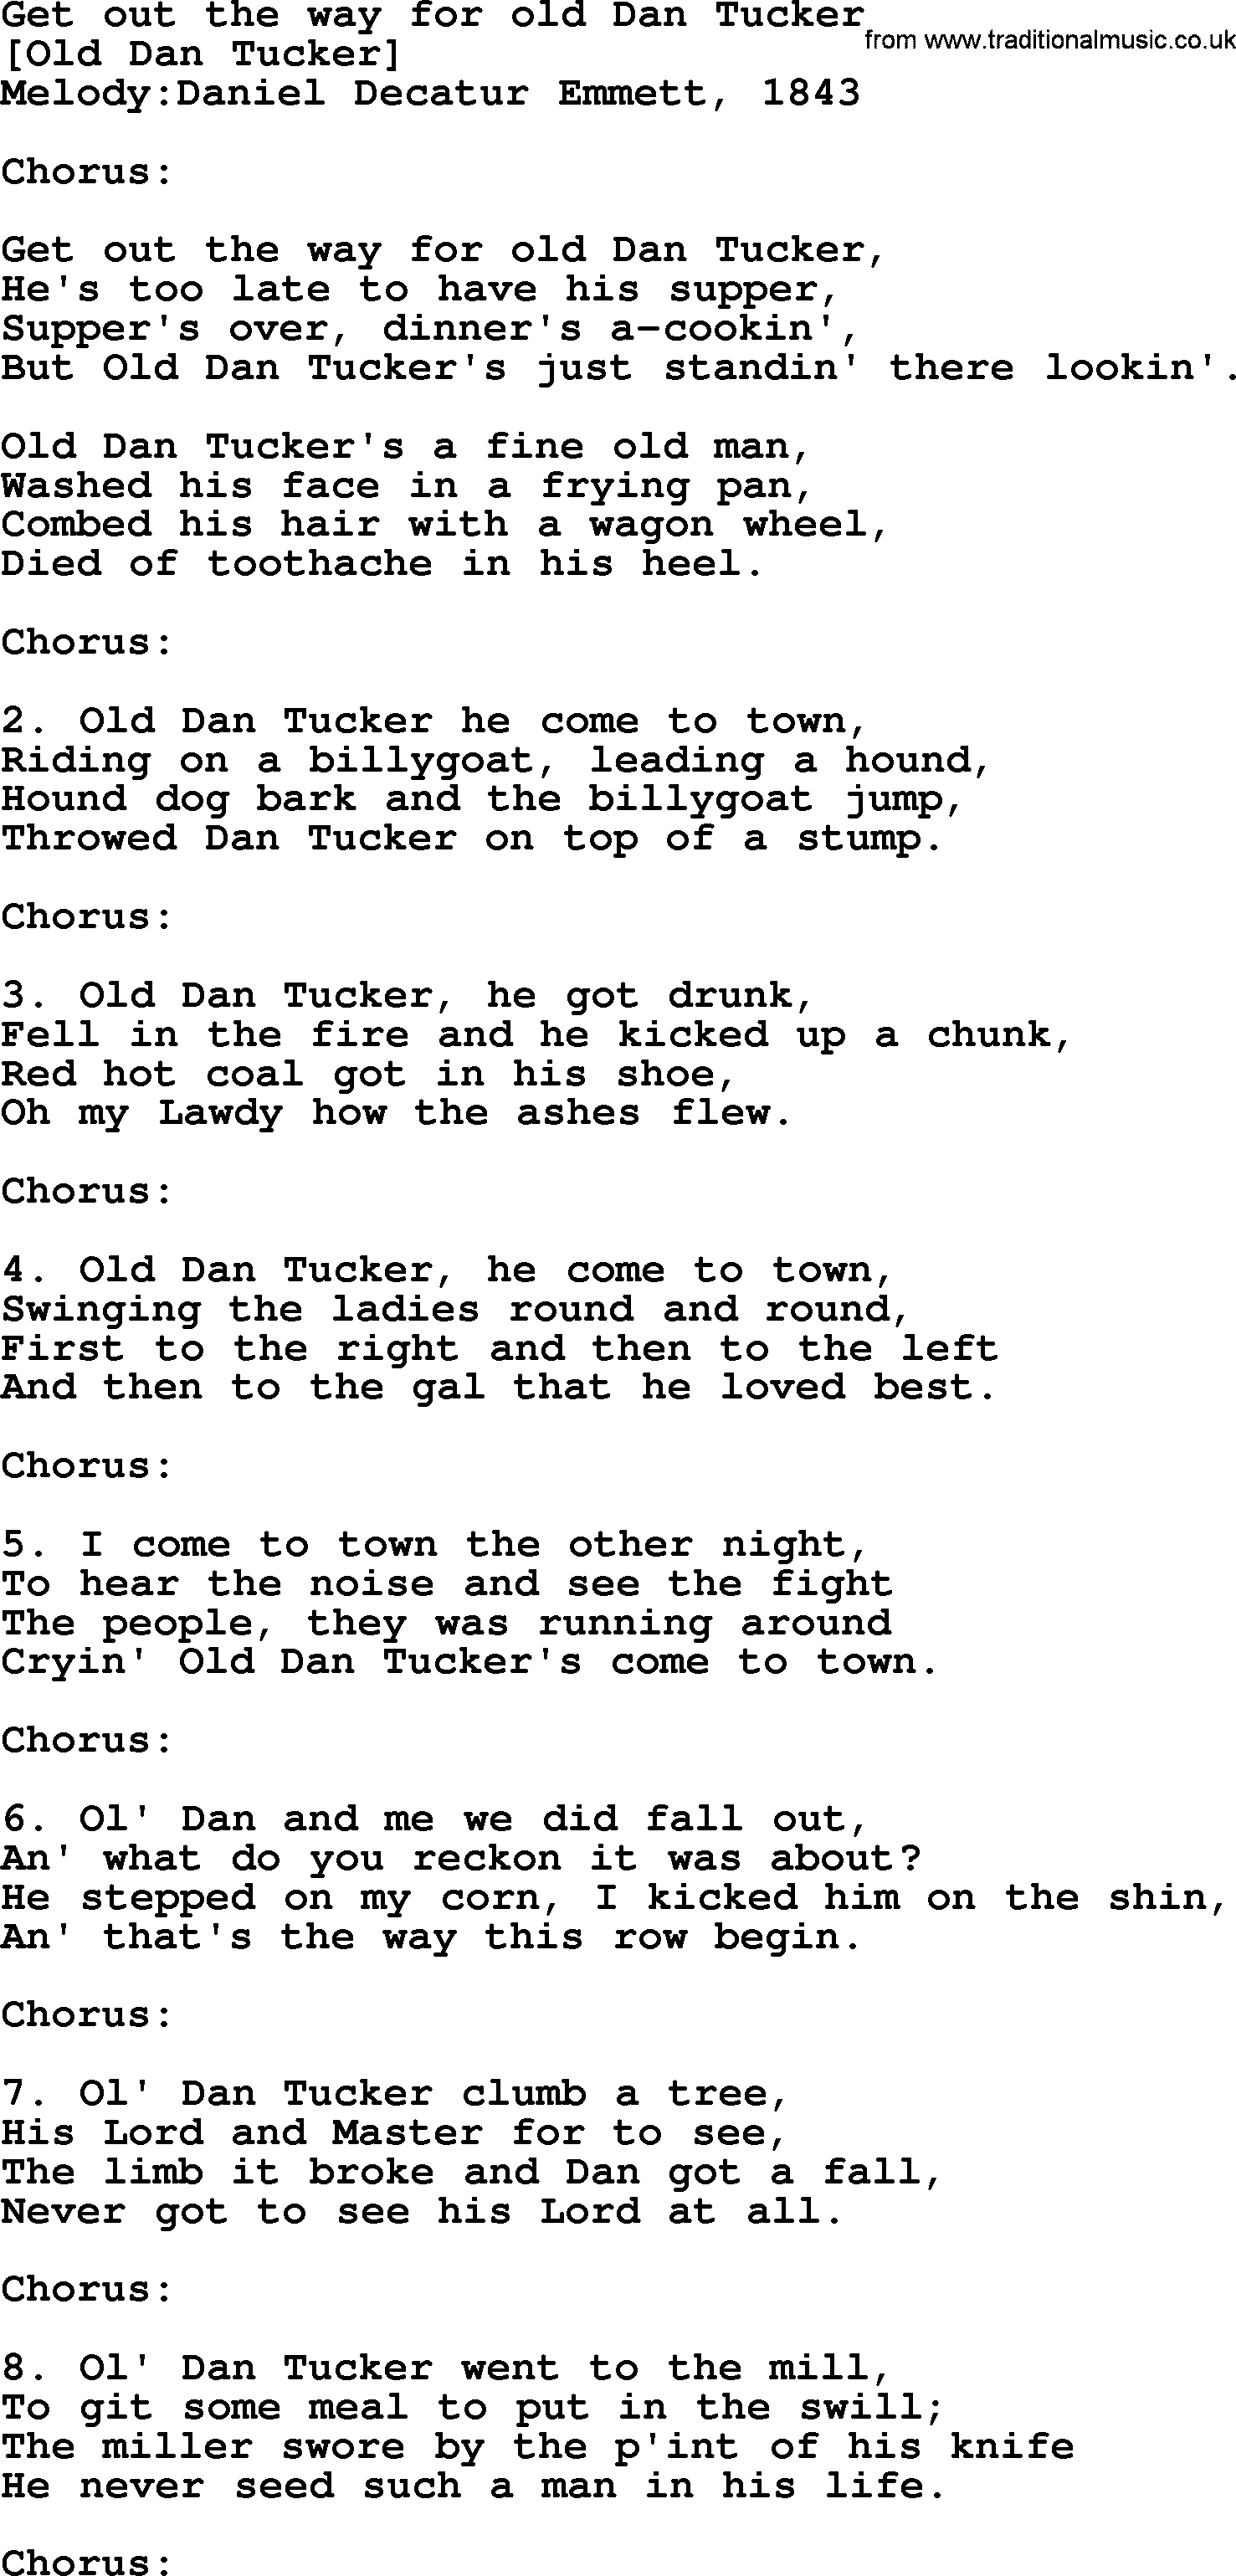 Old American Song: Get Out The Way For Old Dan Tucker, lyrics